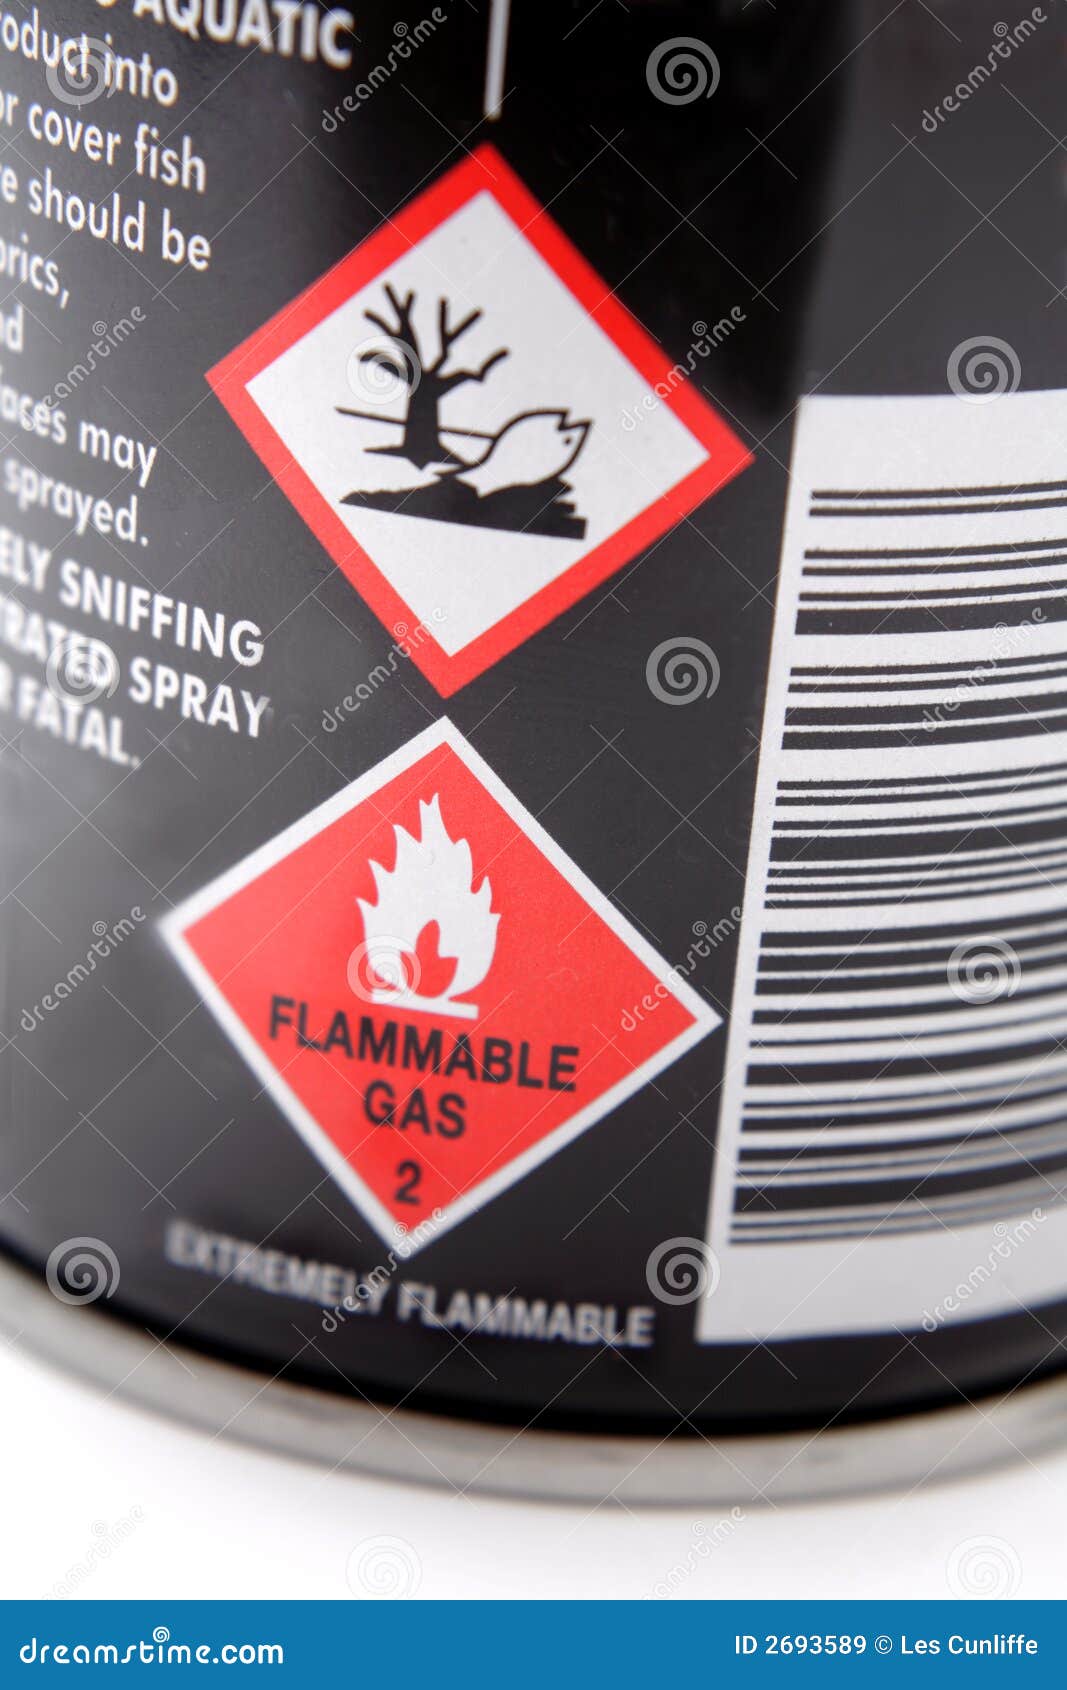 labels on side of aerosol can